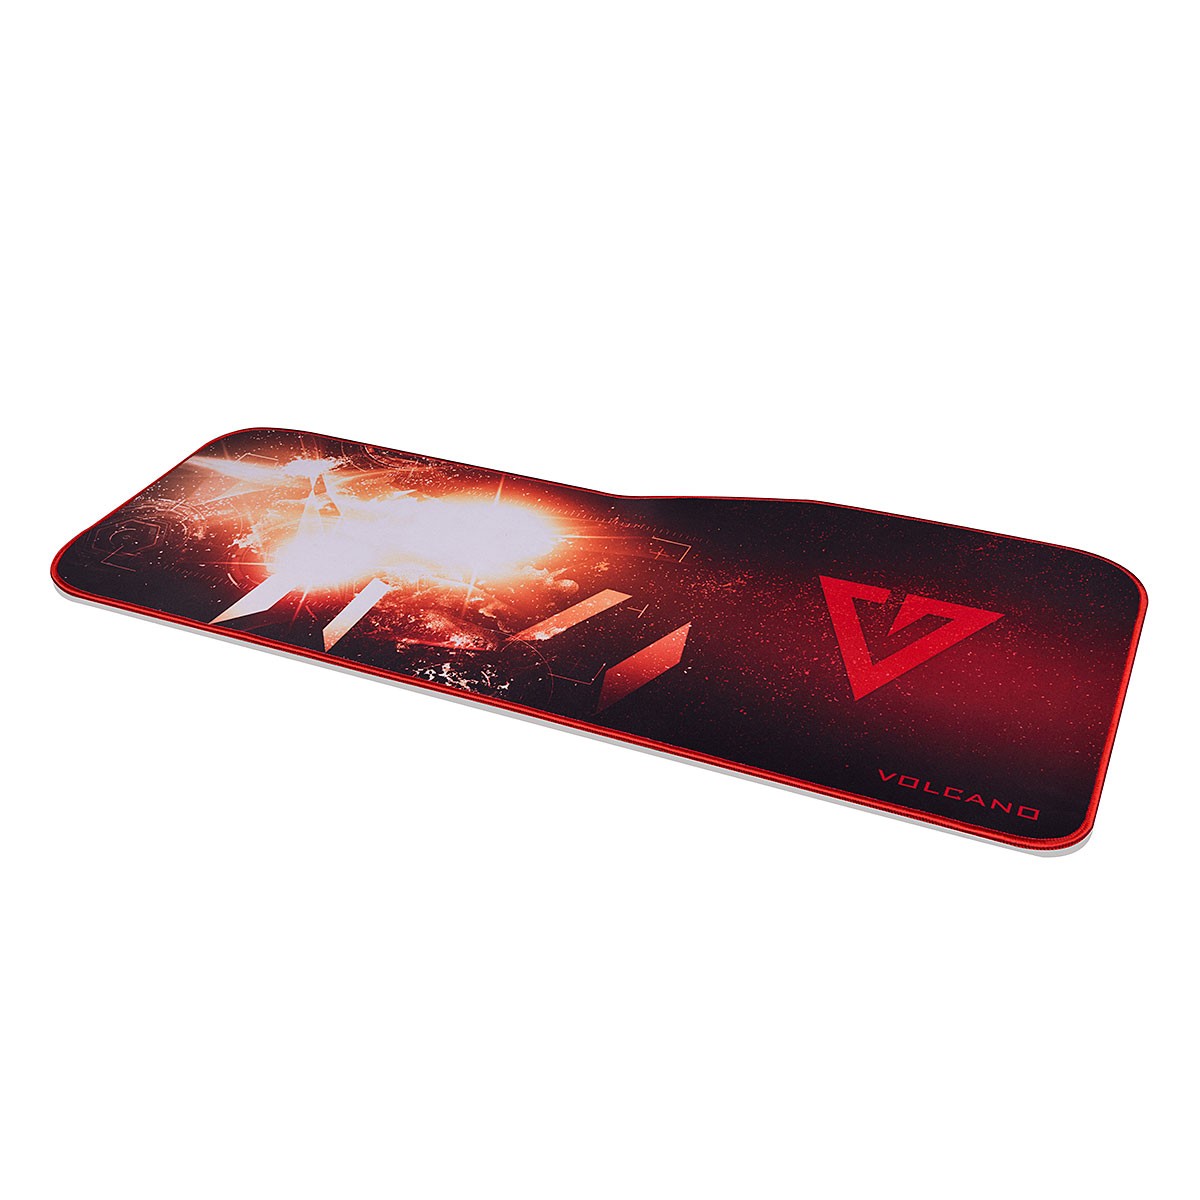 MODECOM VOLCANO 800x345x3mm mousepad for gamers